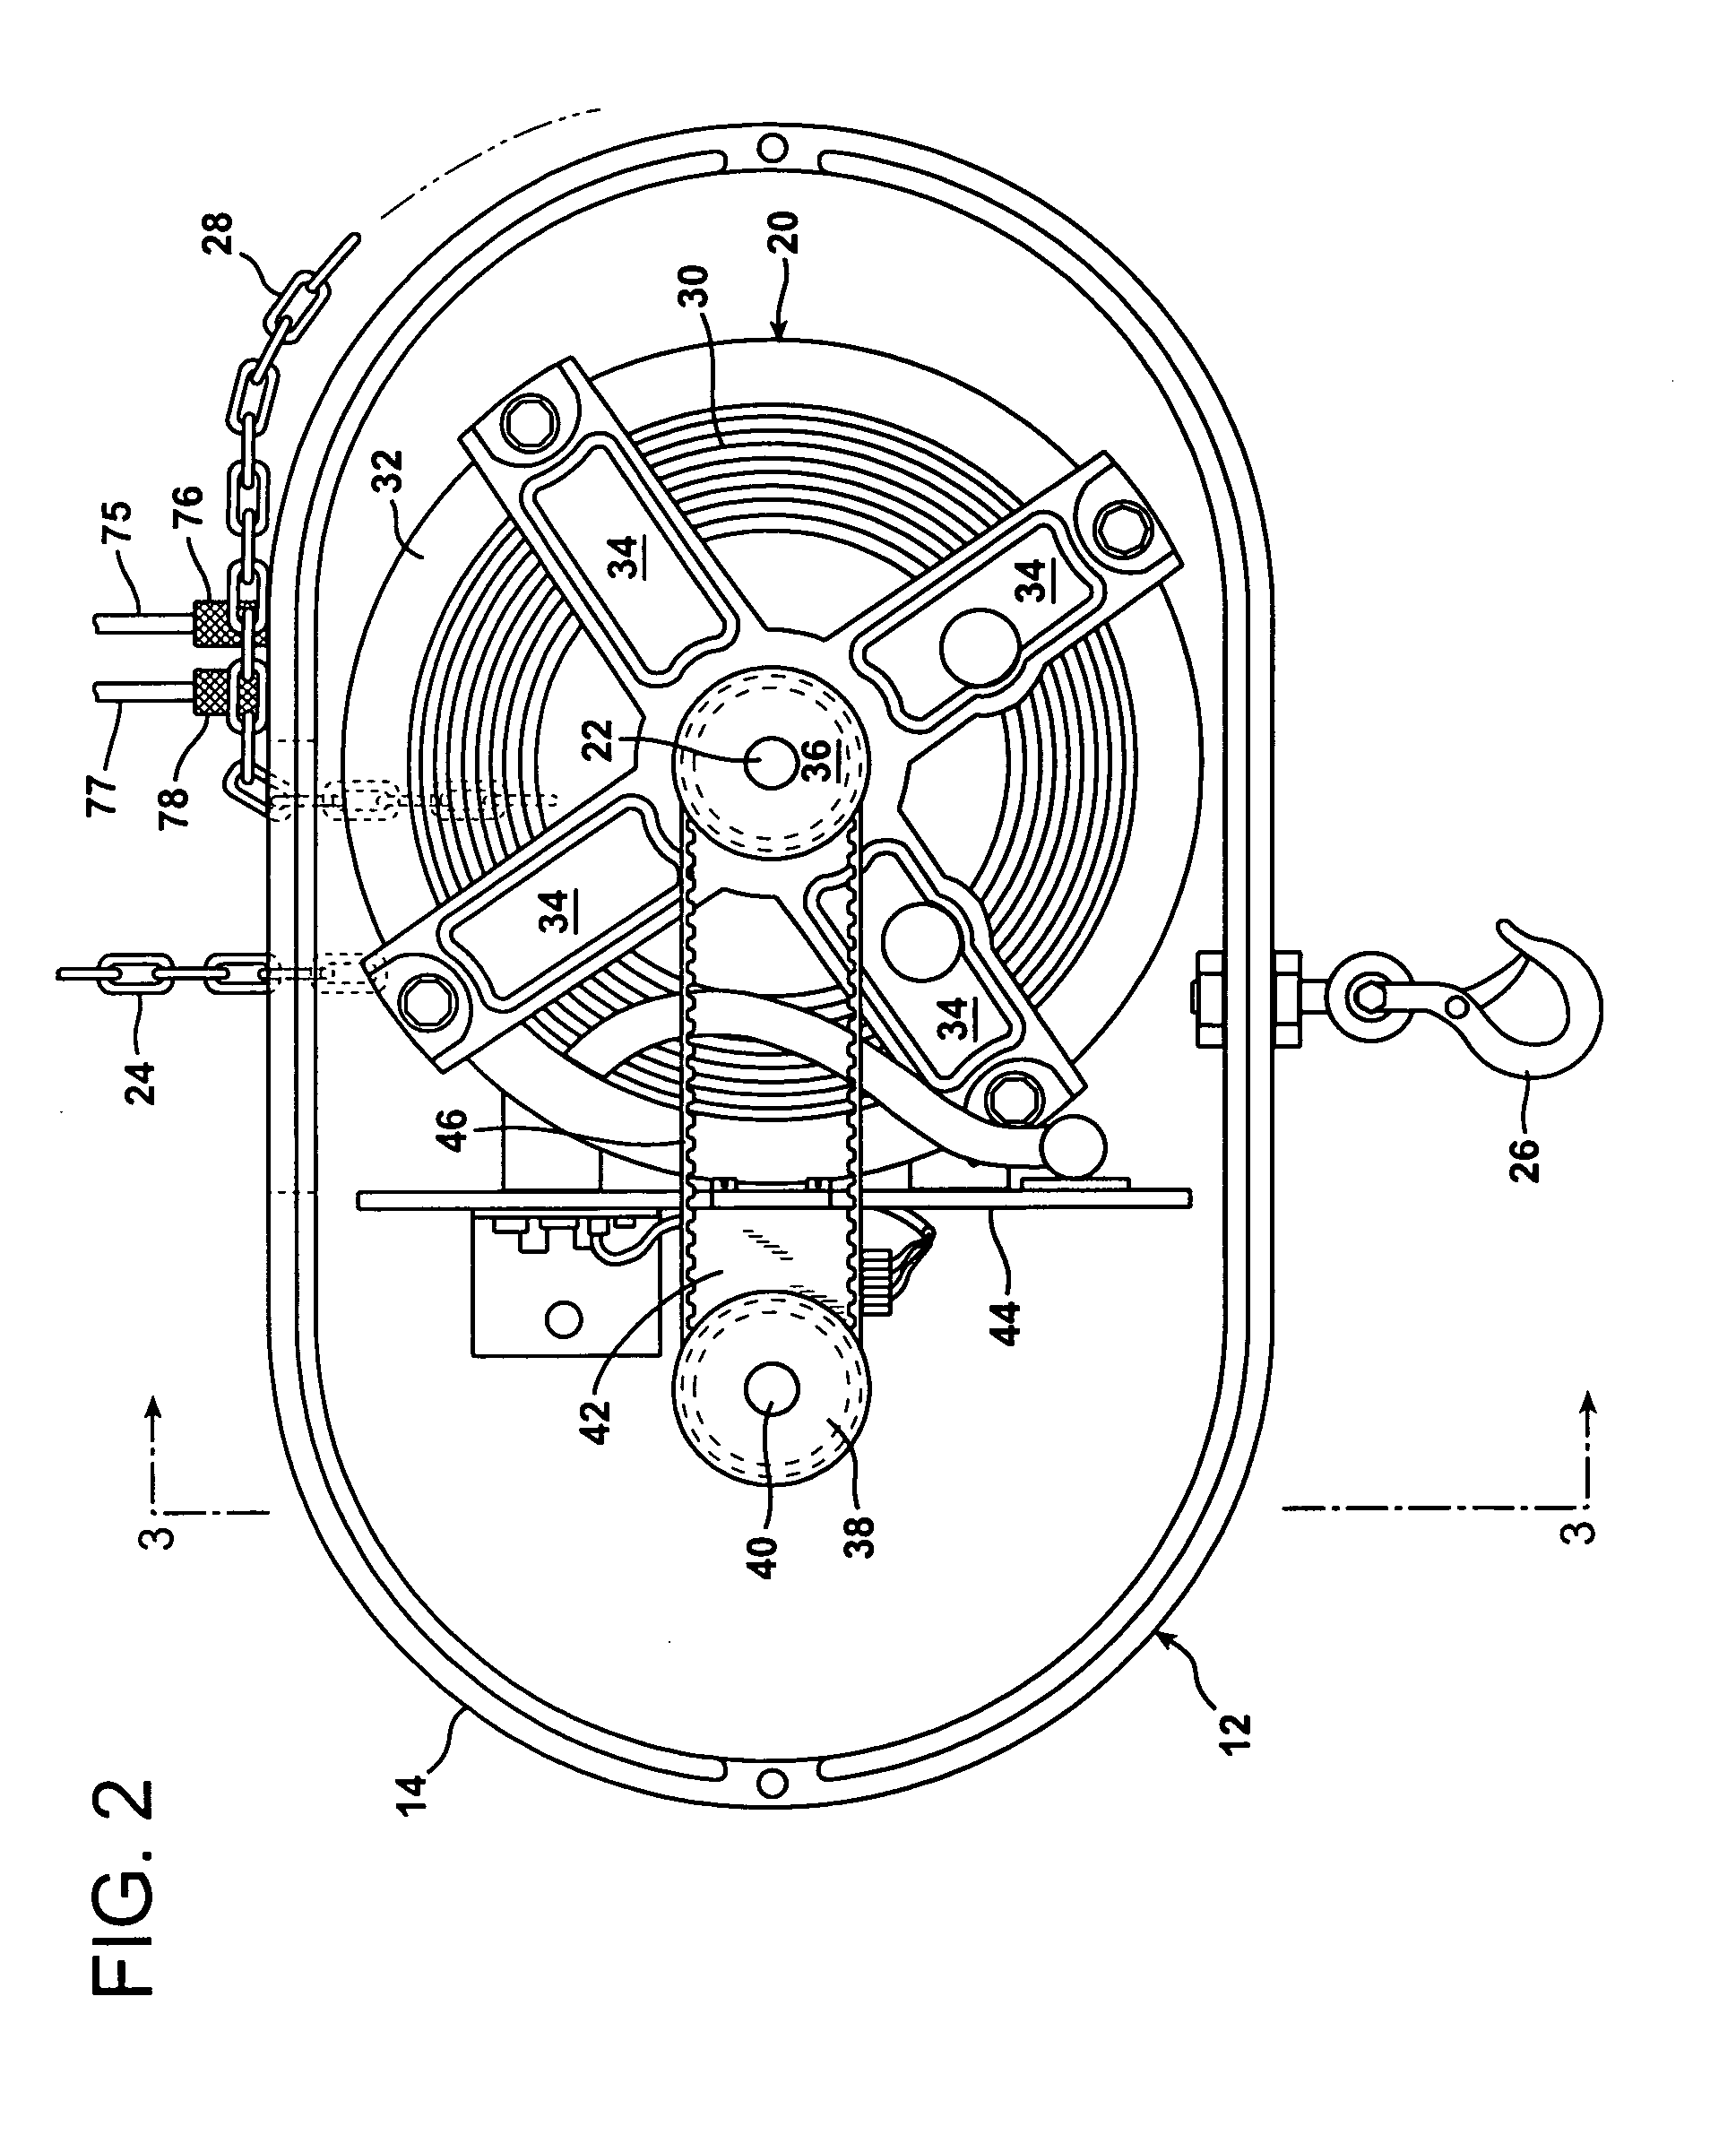 Chain motor drive control system